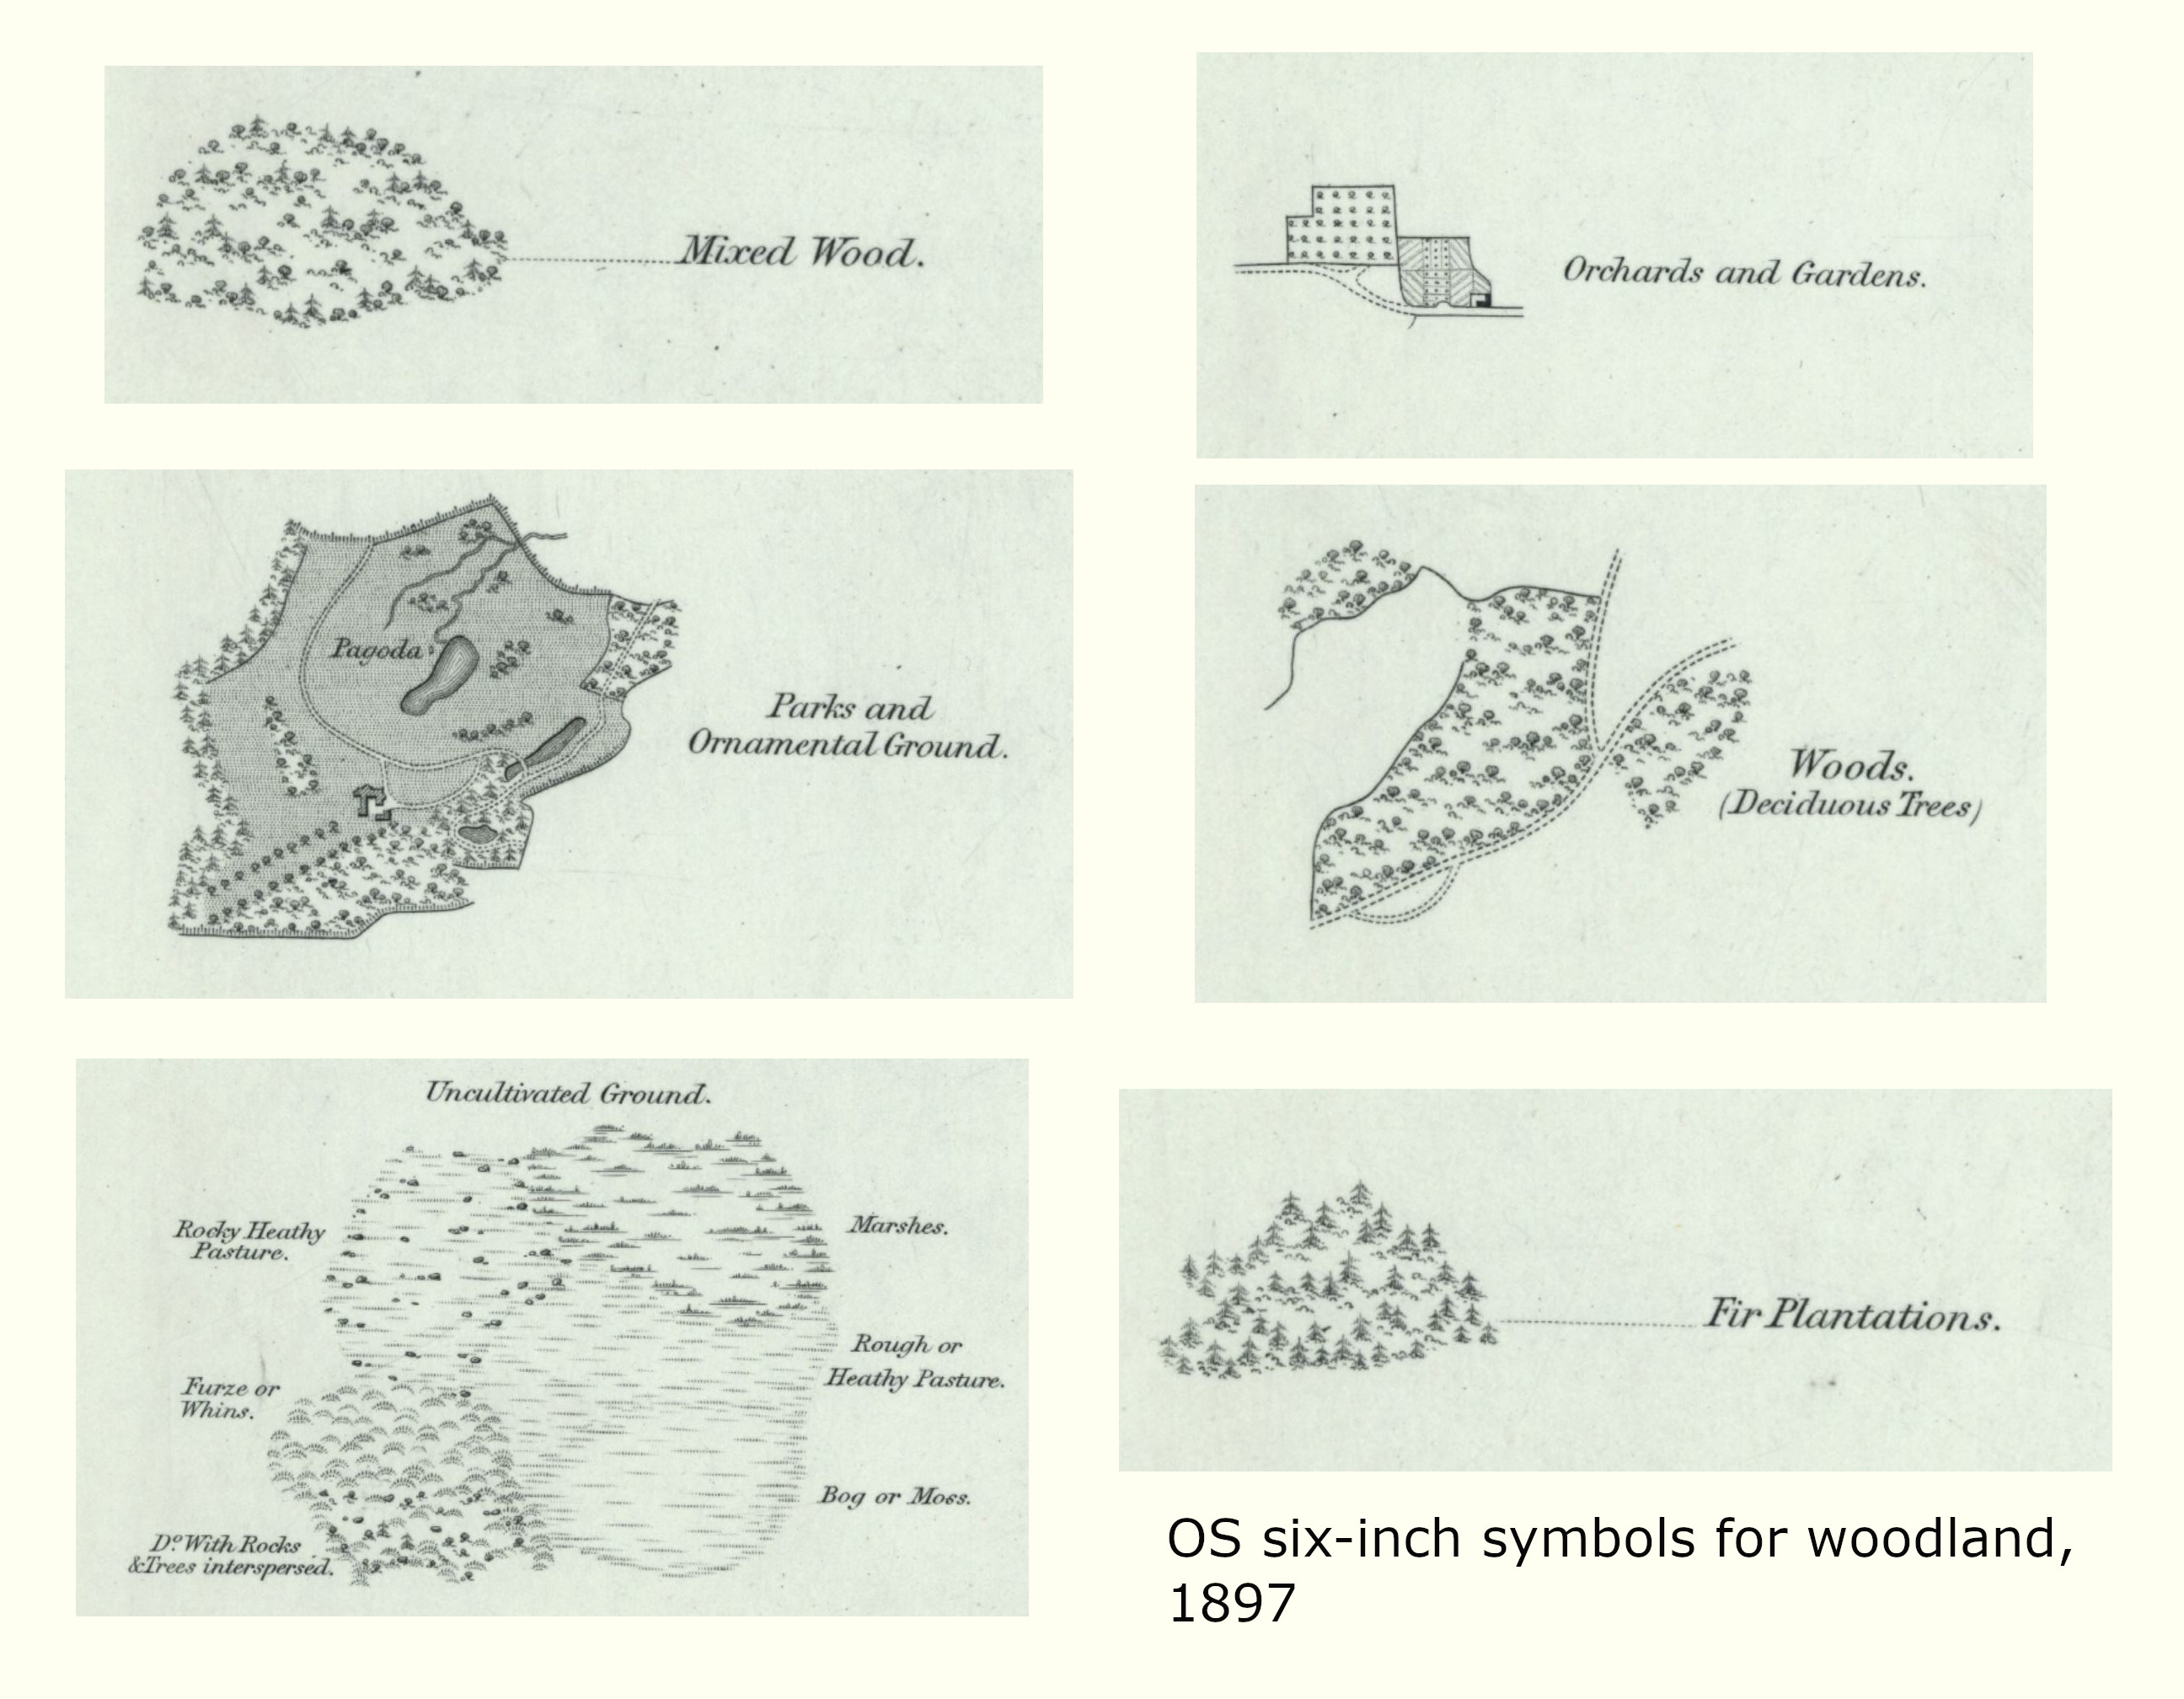 Examples of symbols used on OS six-inch maps